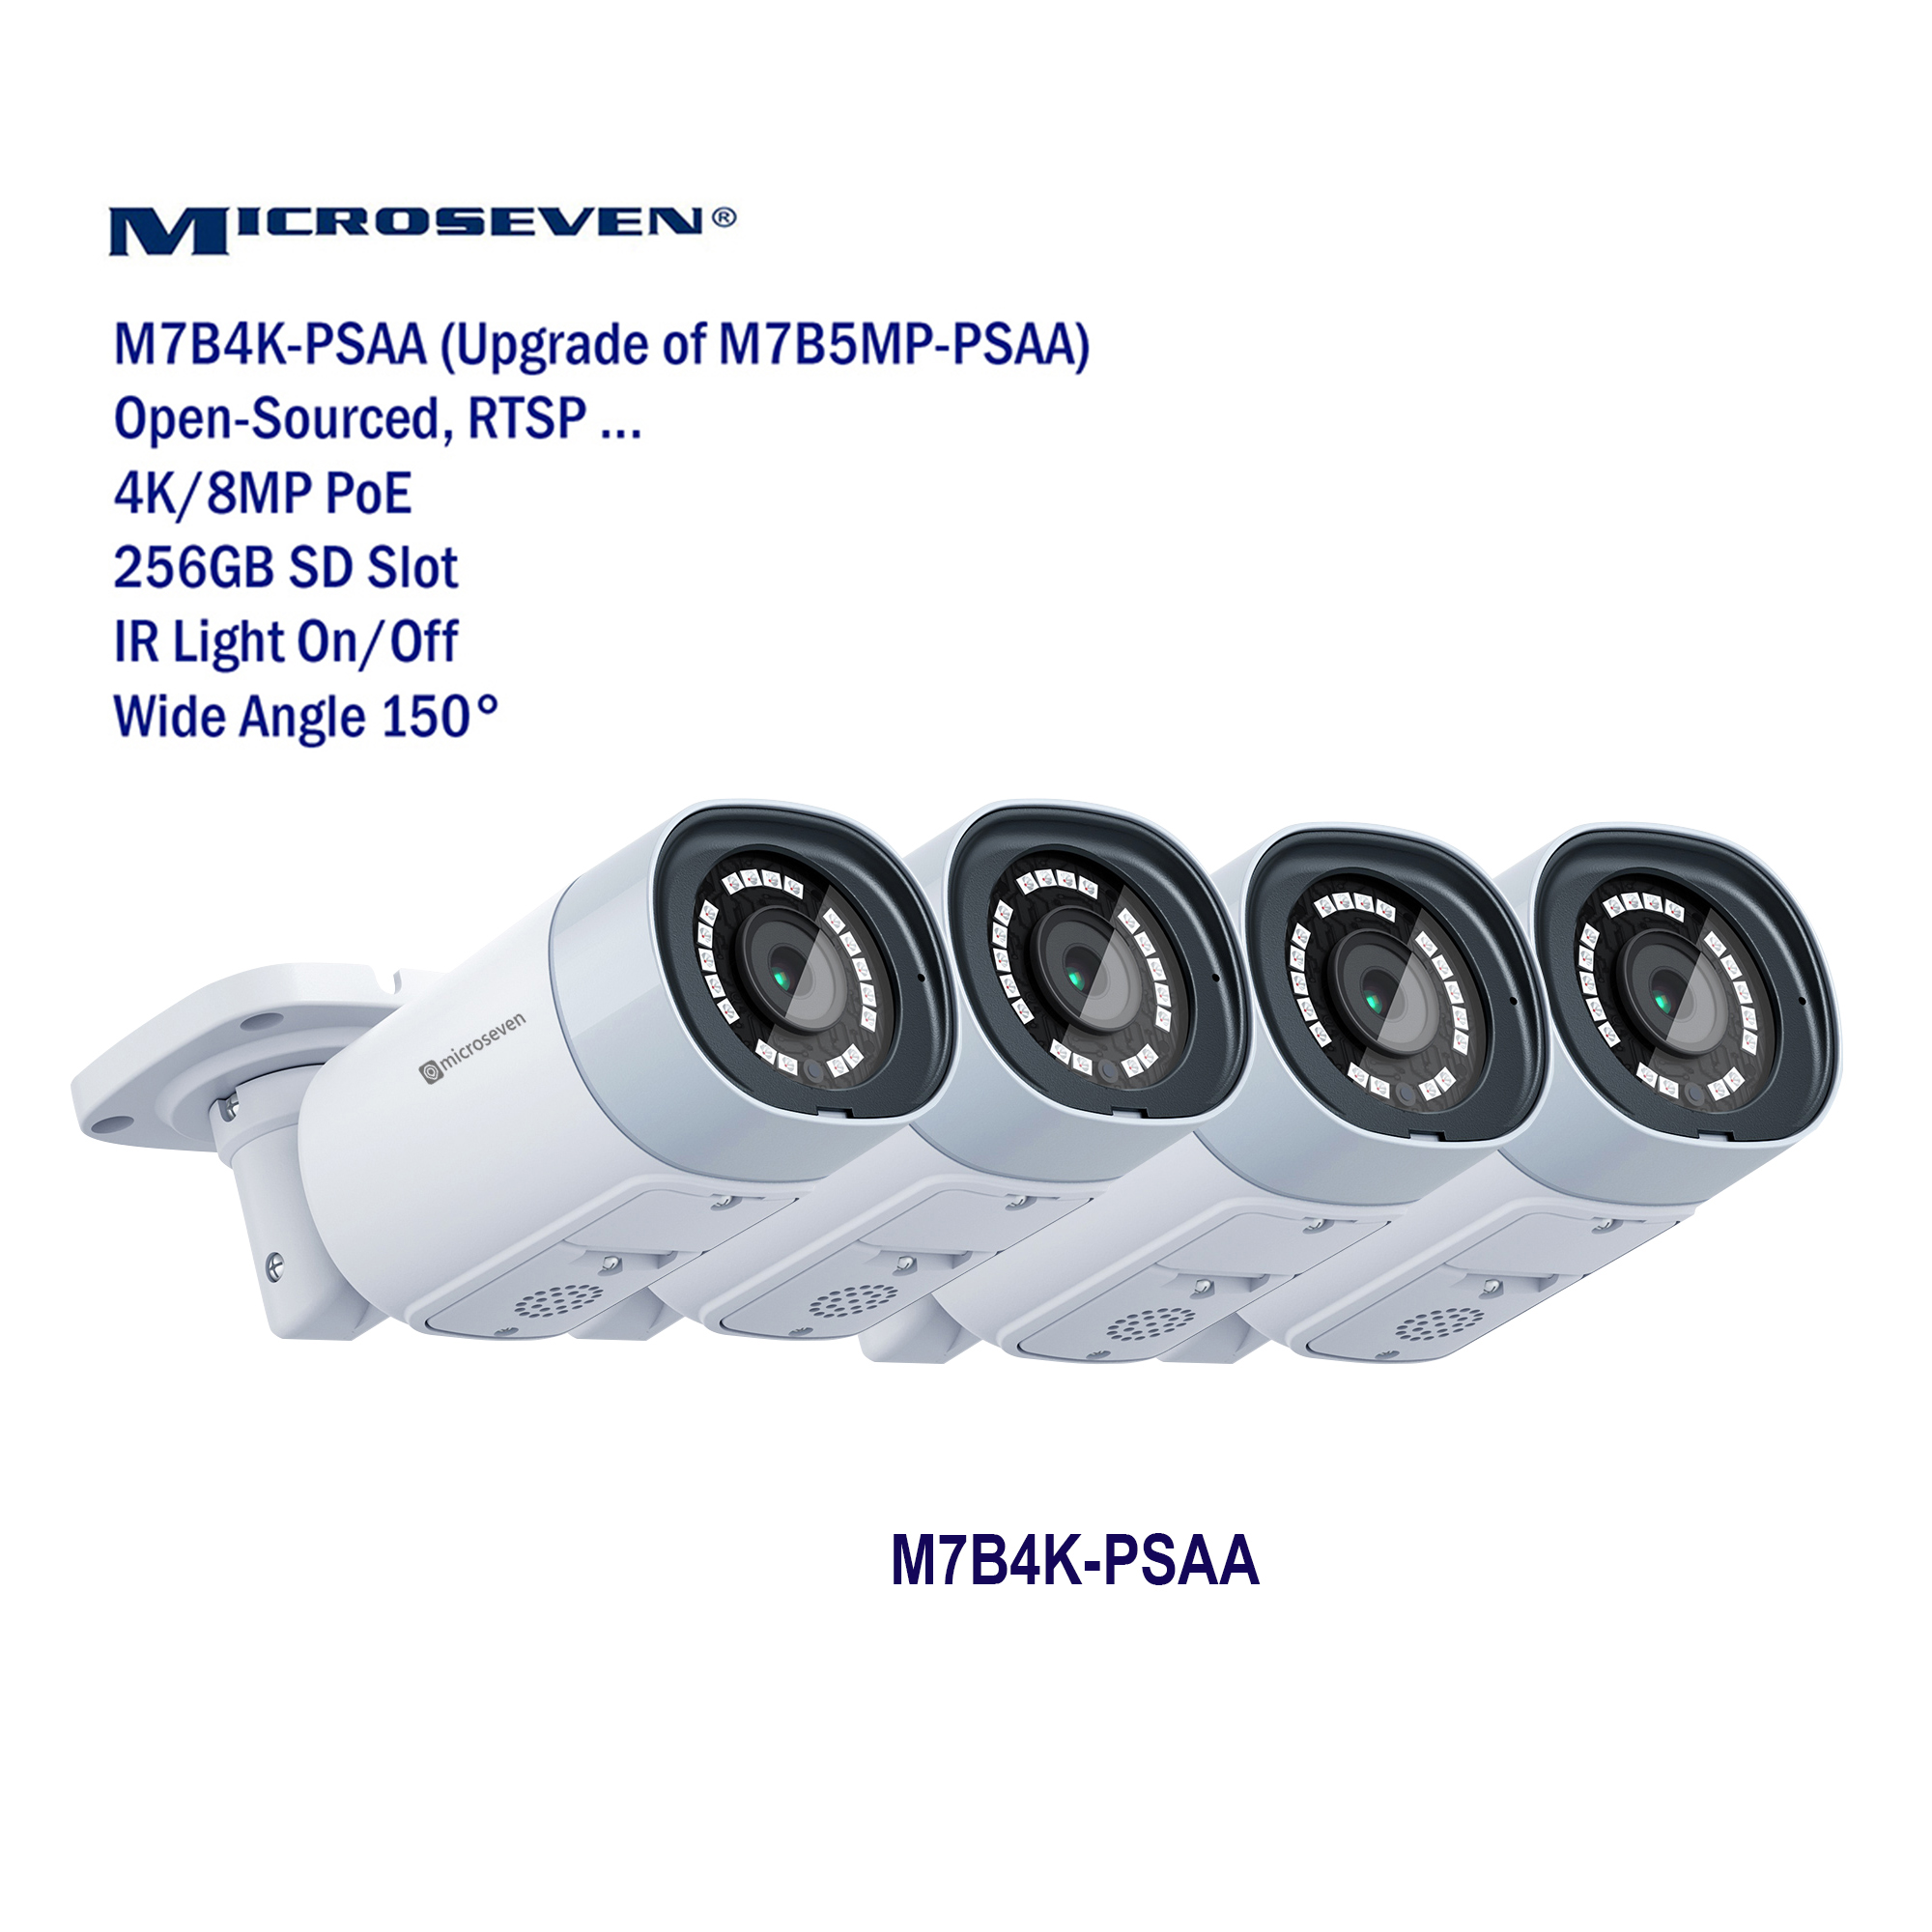 4x Microseven Open Source Ultra HD 4K/8MP(3840x2160) PoE SONY 1/2.8" Chipset CMOS 2.8mm 8MP Lens Ultra-Wide Angle, Two-Way Audio with Built-in Amplified Microphone and Speaker plug and Play ONVIF, IR Light (On/Off in the APP) Security Outdoor IP Camera, Human/Vehicle Detection, 256GB SD Slot, Day & Night, Web GUI & Apps, CMS (Camera Management System) M7 Cloud Storage and Broadcasting on YouTube & Microseven